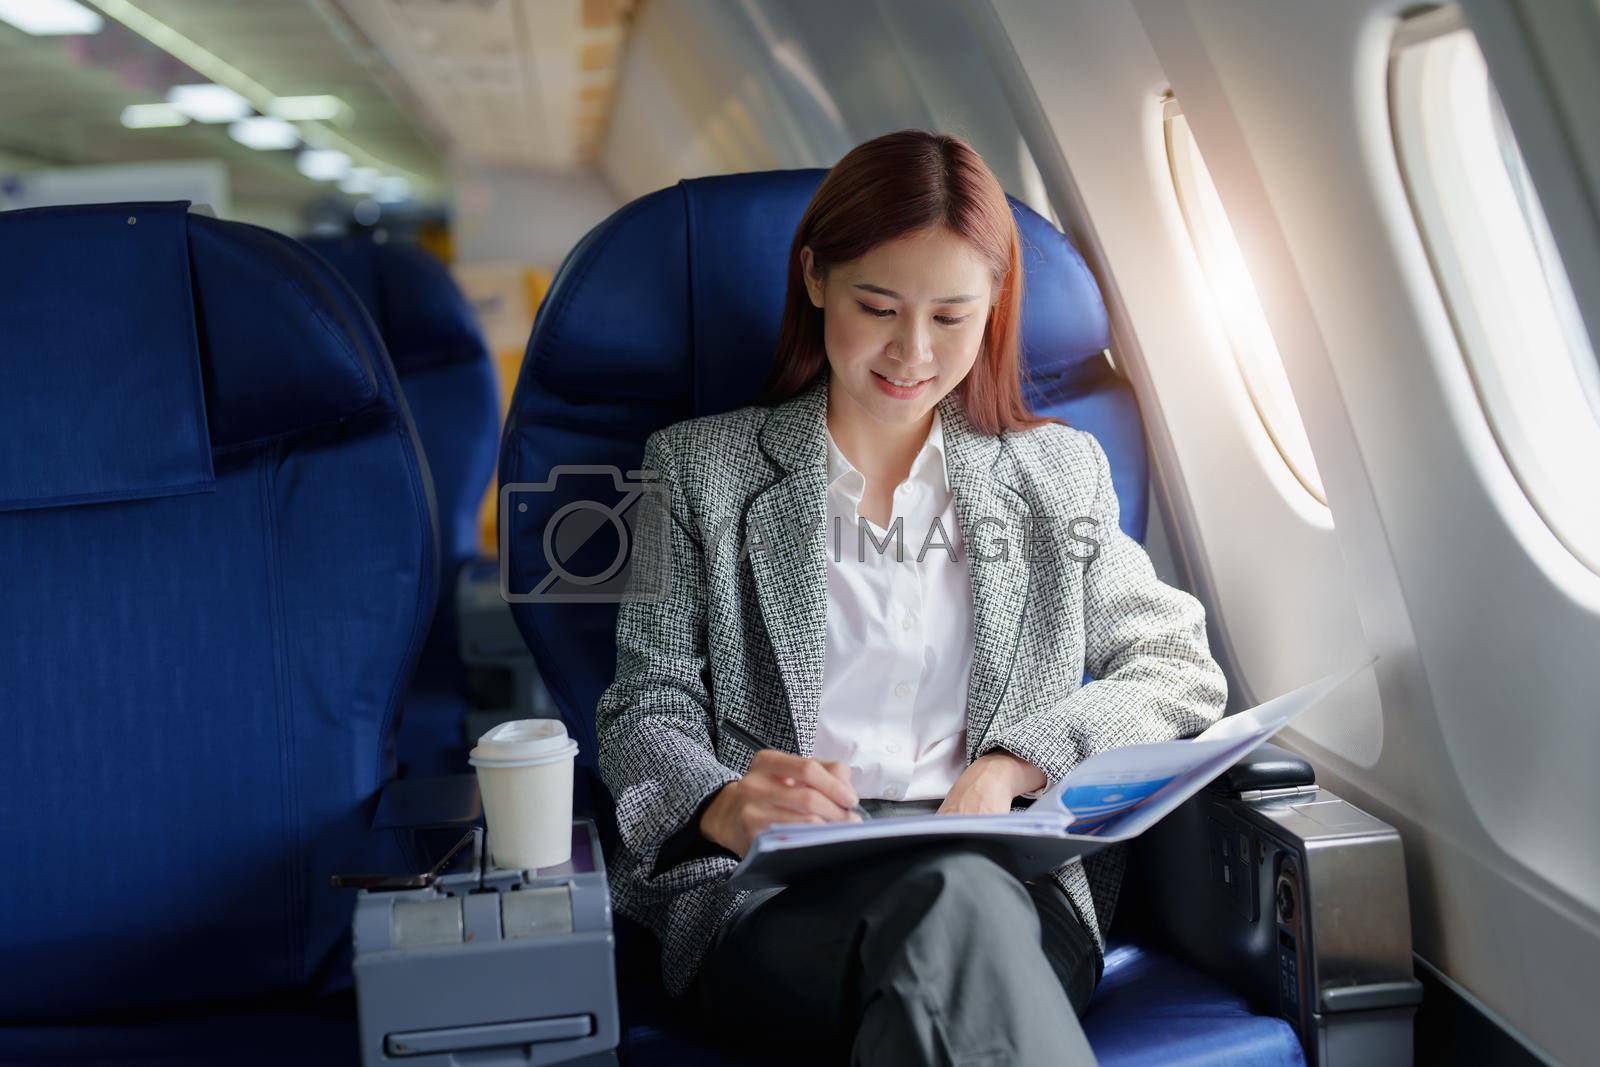 Royalty free image of portrait of A successful asian business woman or female entrepreneur in formal suit in a plane sits in a business class seat and uses a pen with documents for work during flight by Manastrong